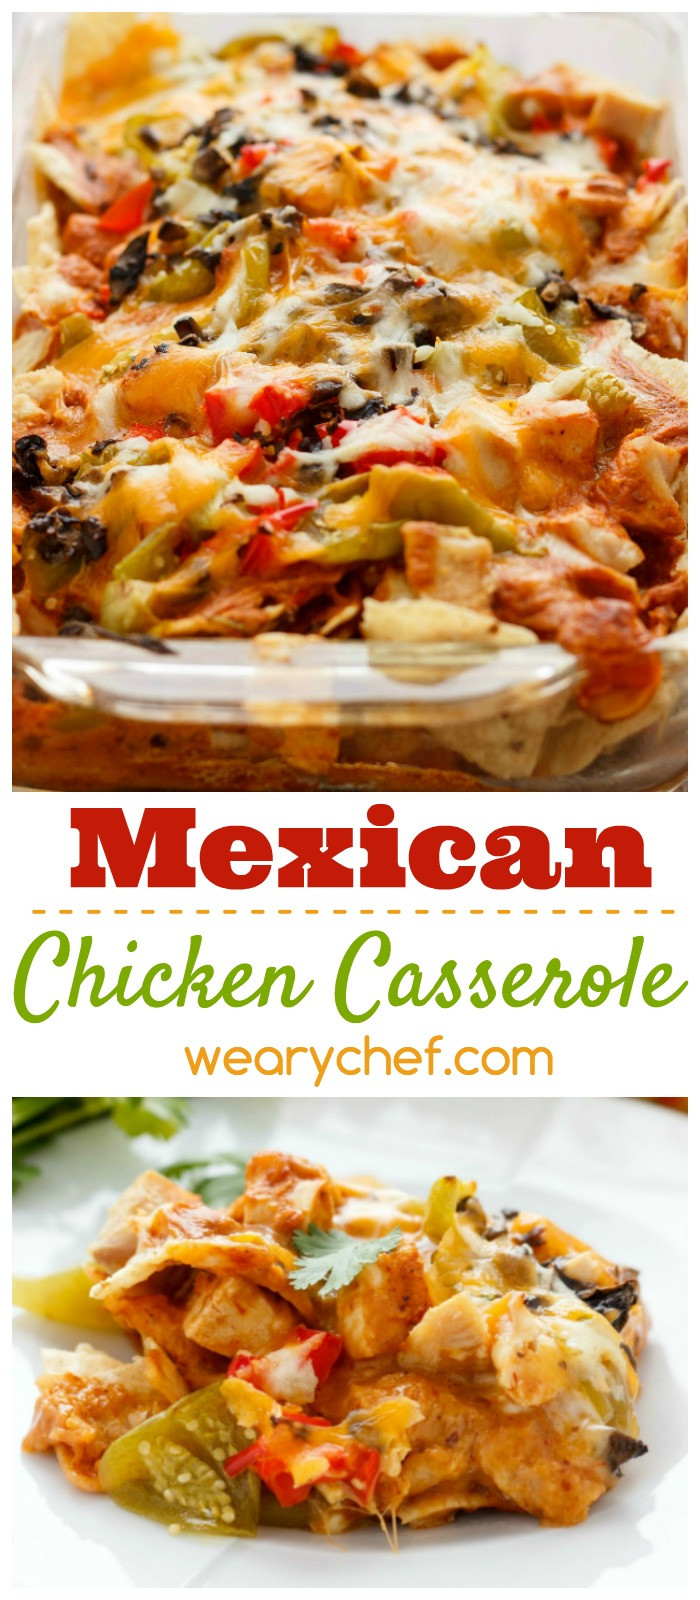 Mexican Casserole With Tortilla Chips
 Mexican Chicken Casserole with Tortilla Chips The Weary Chef